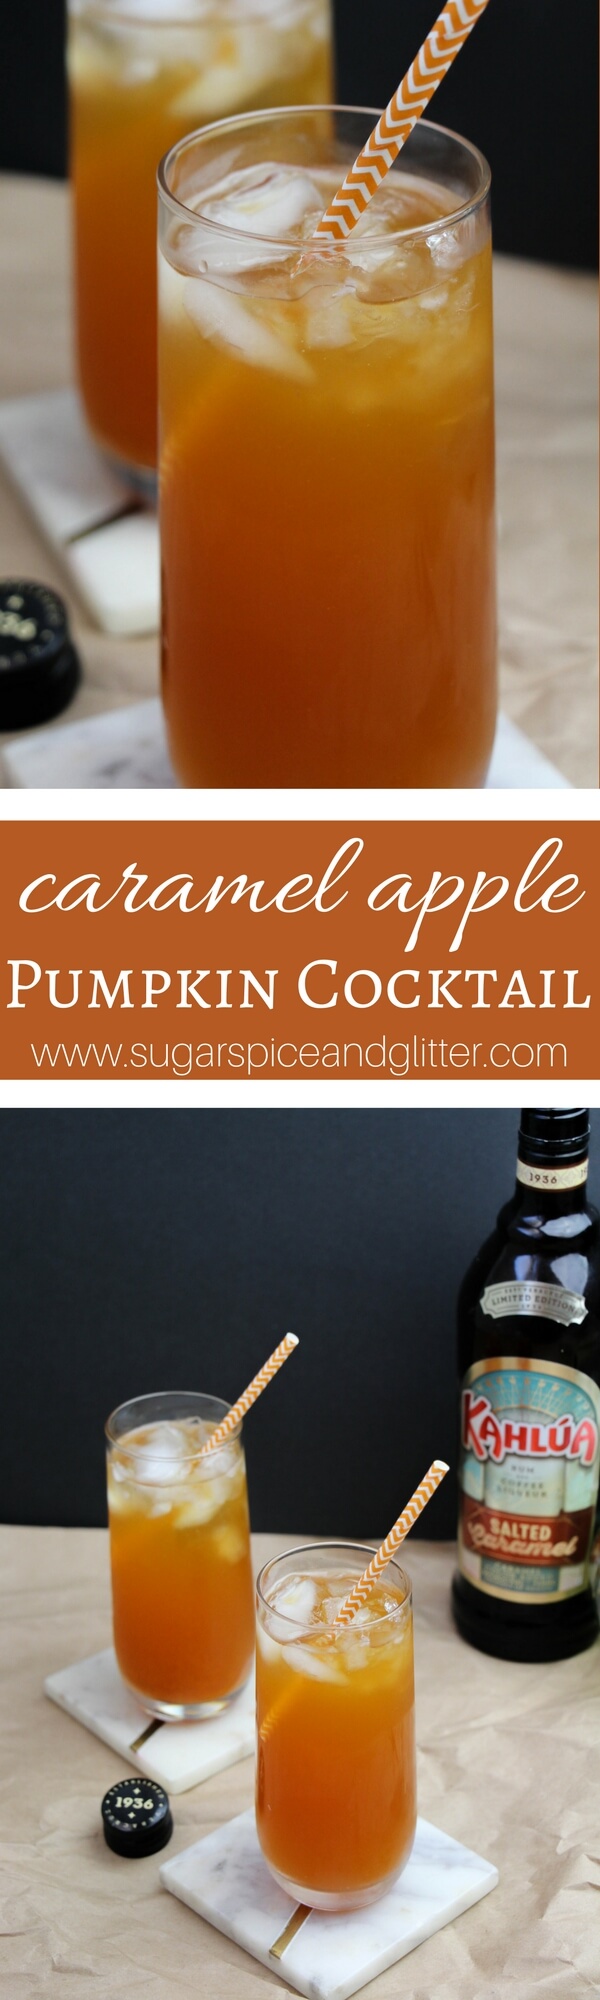 Salted Caramel Apple Pumpkin Cocktail, the perfect fall cocktail recipe with an unexpected flavor profile